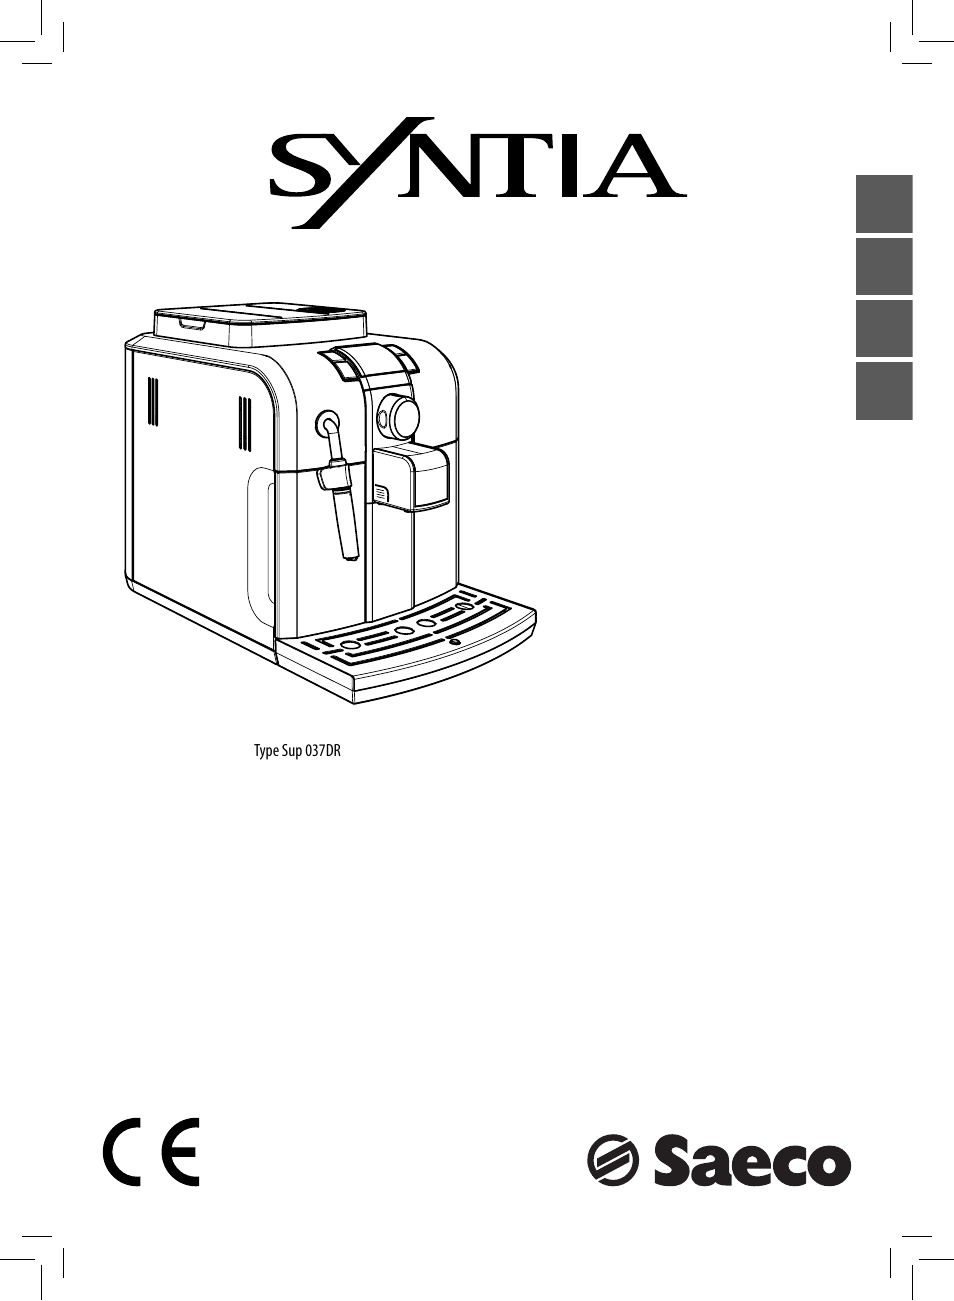 Philips Saeco Syntia Kaffeevollautomat User Manual | 96 pages | Also